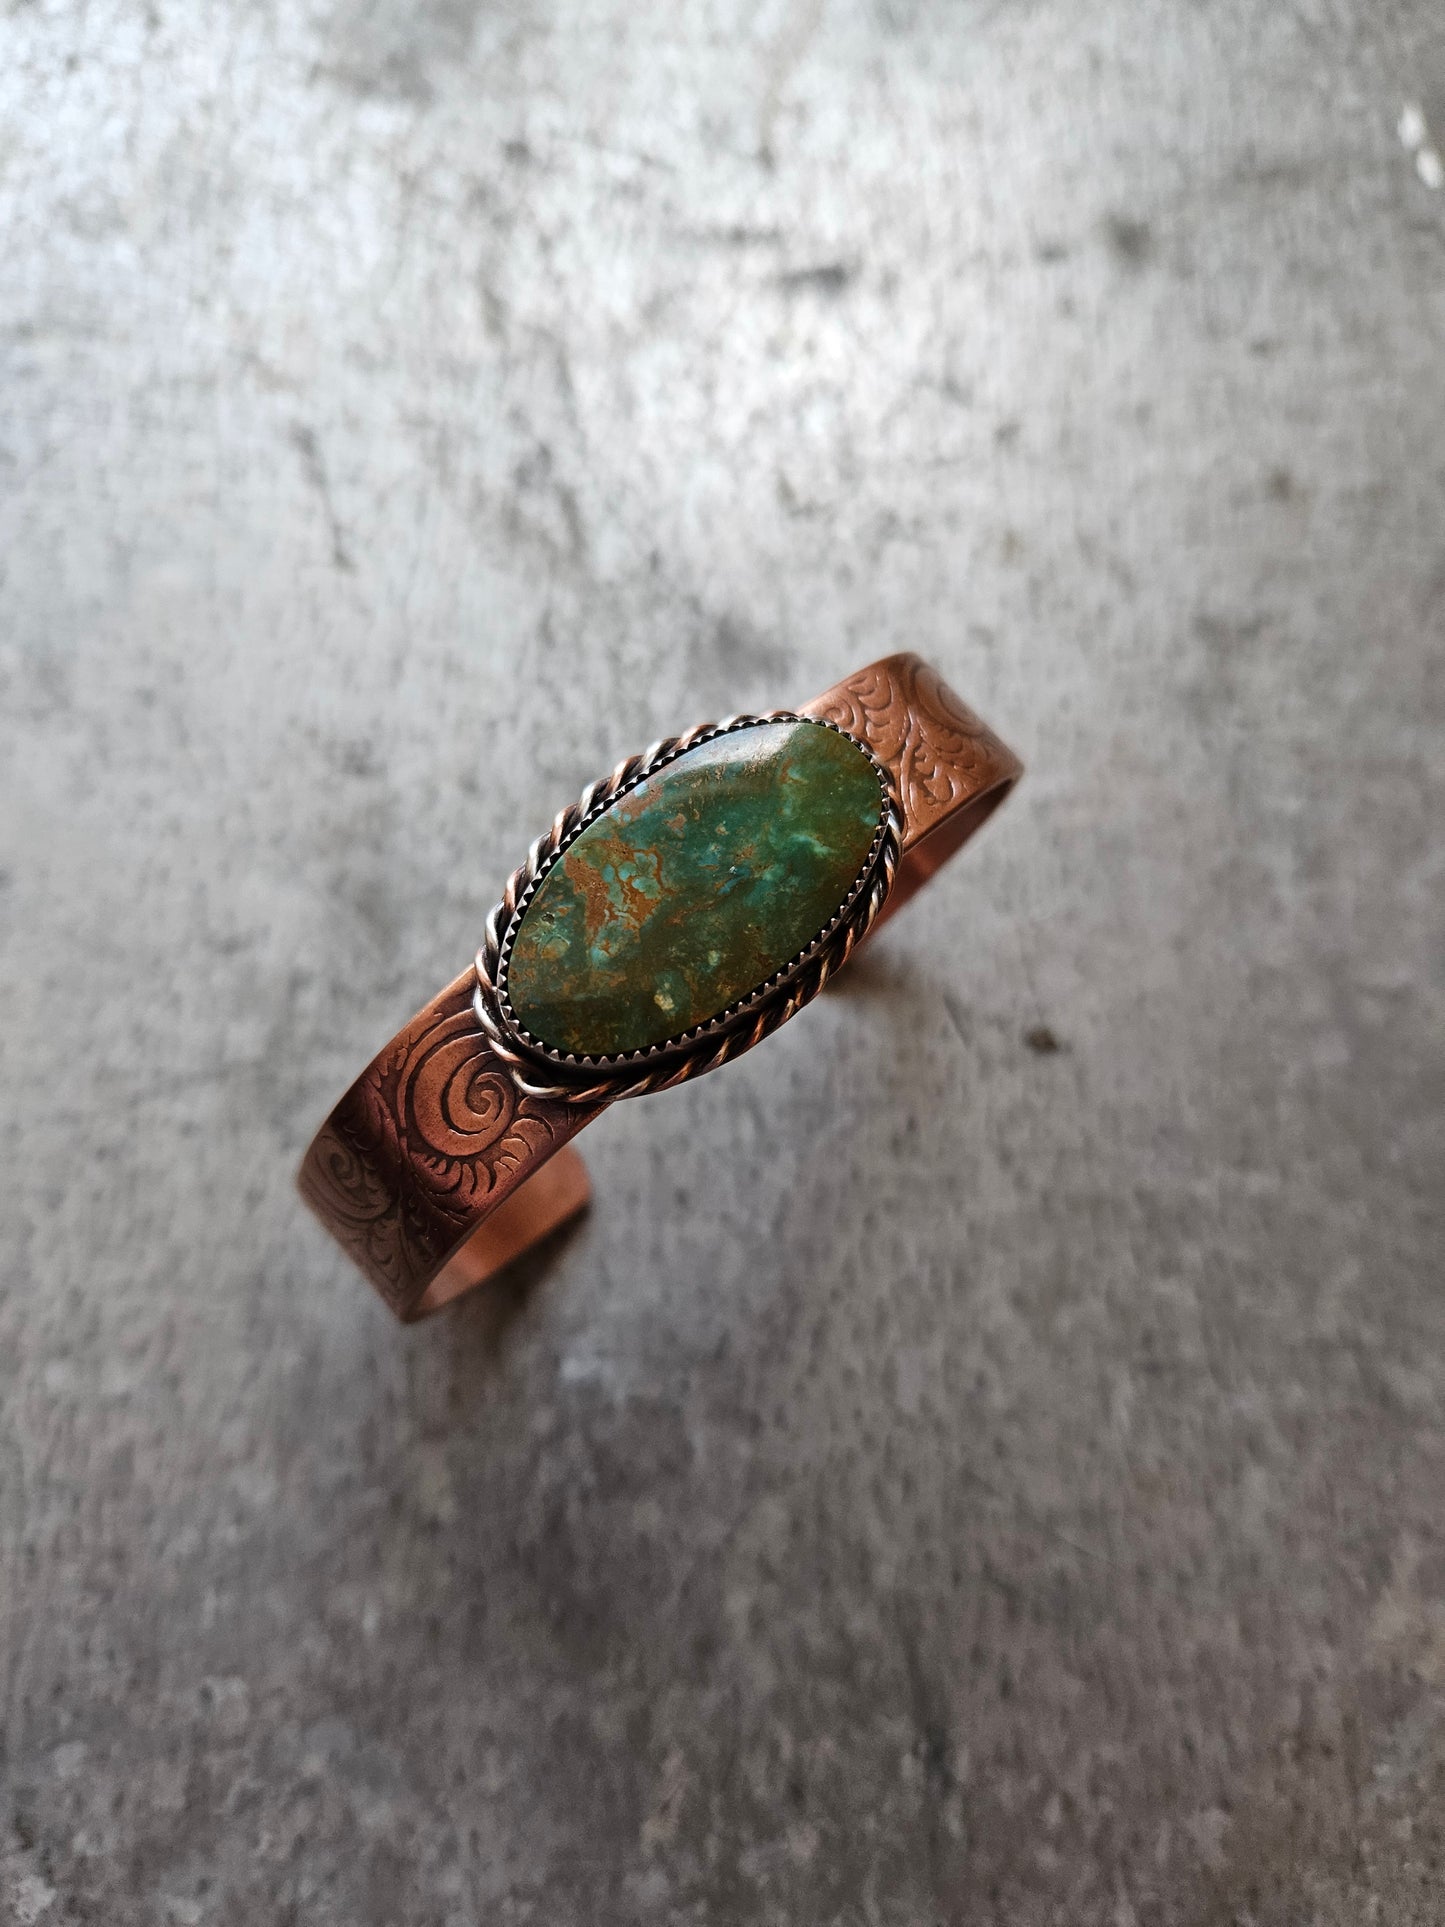 1/2" Copper Cuff with Turquoise